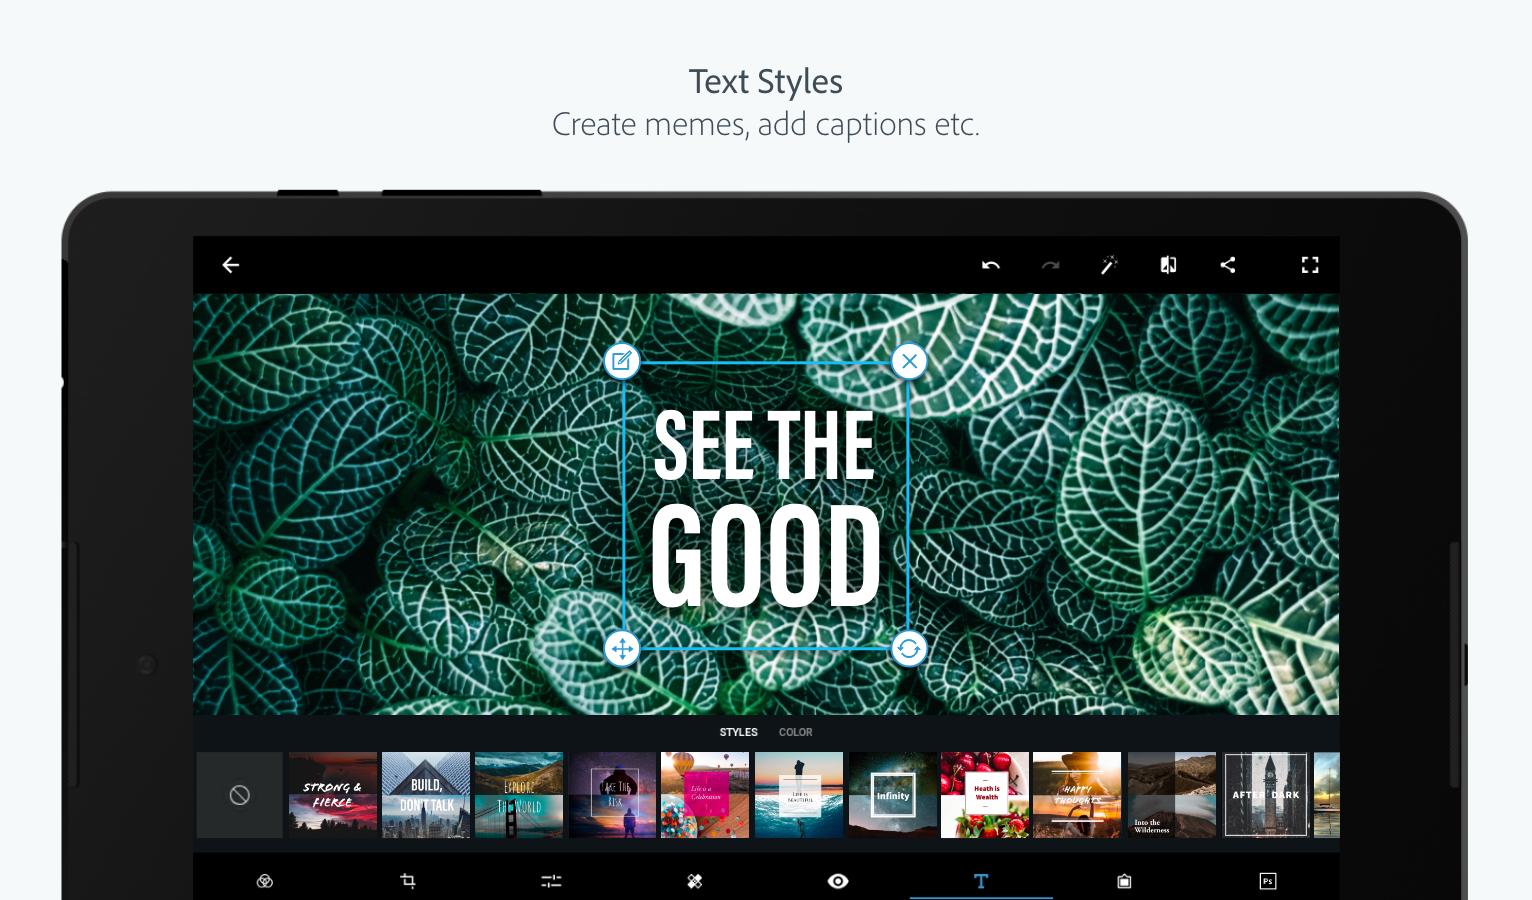 adobe photoshop express free download for android